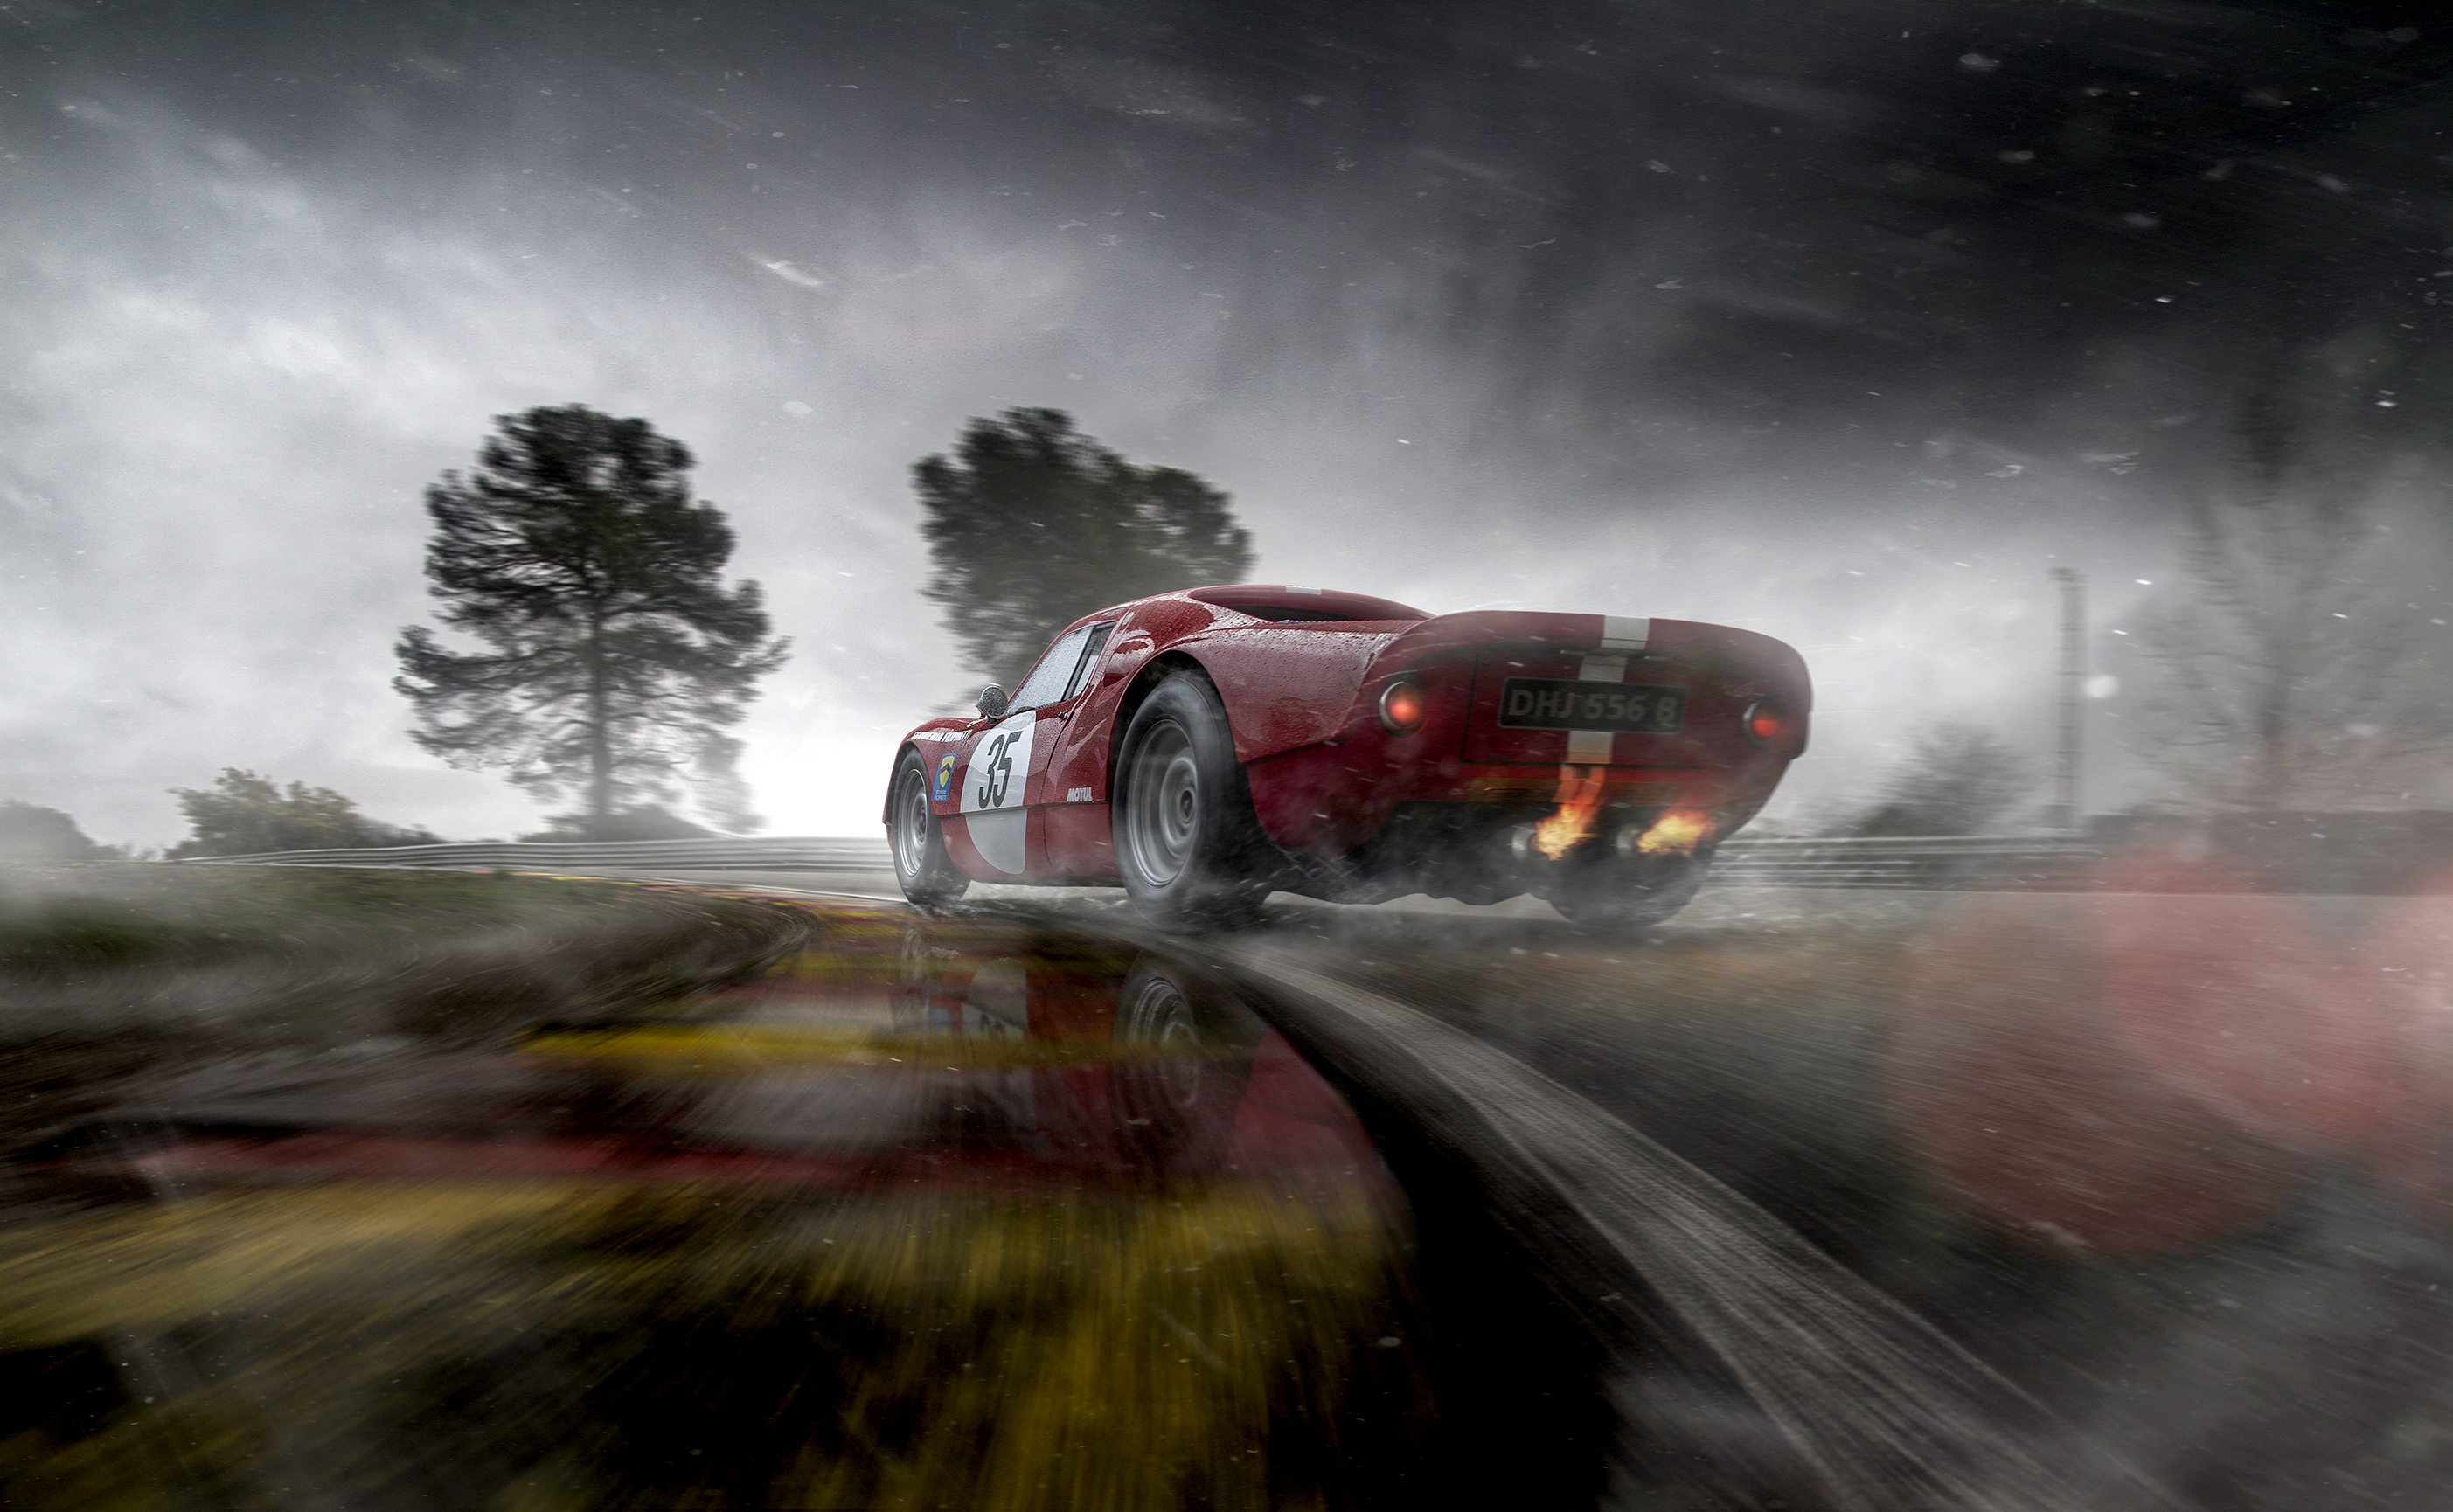 Photoshopped Porsche 904 in bad weather on racetrack